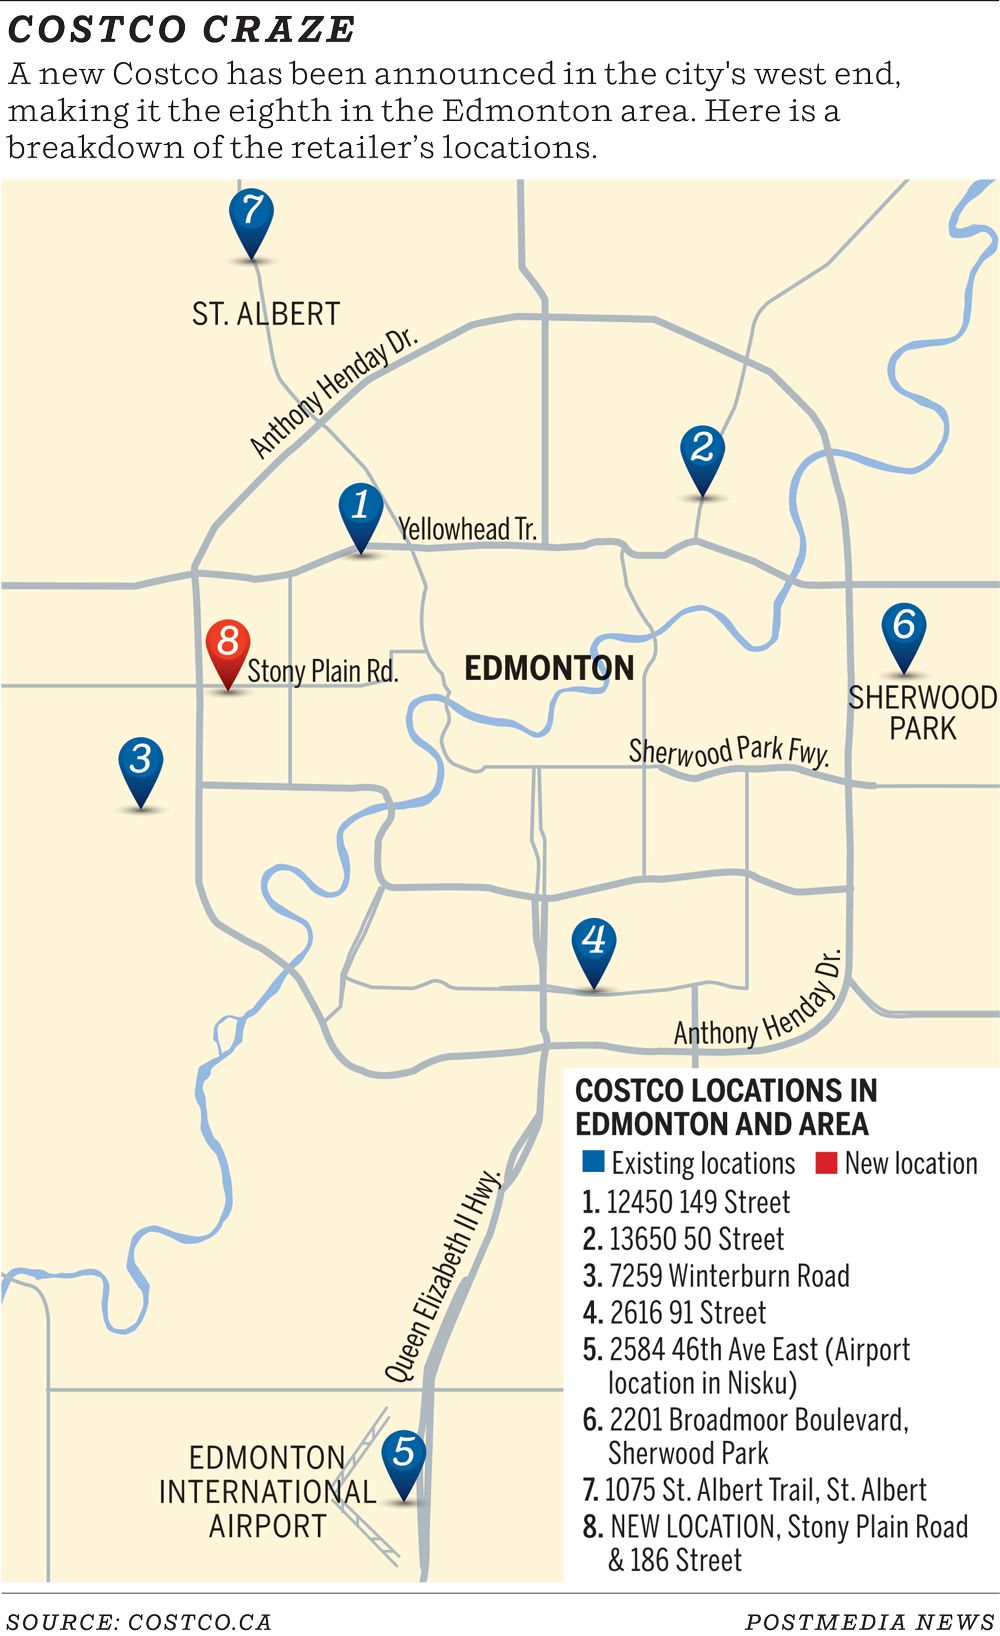 Eighth Edmonton-area Costco location planned for city's west end